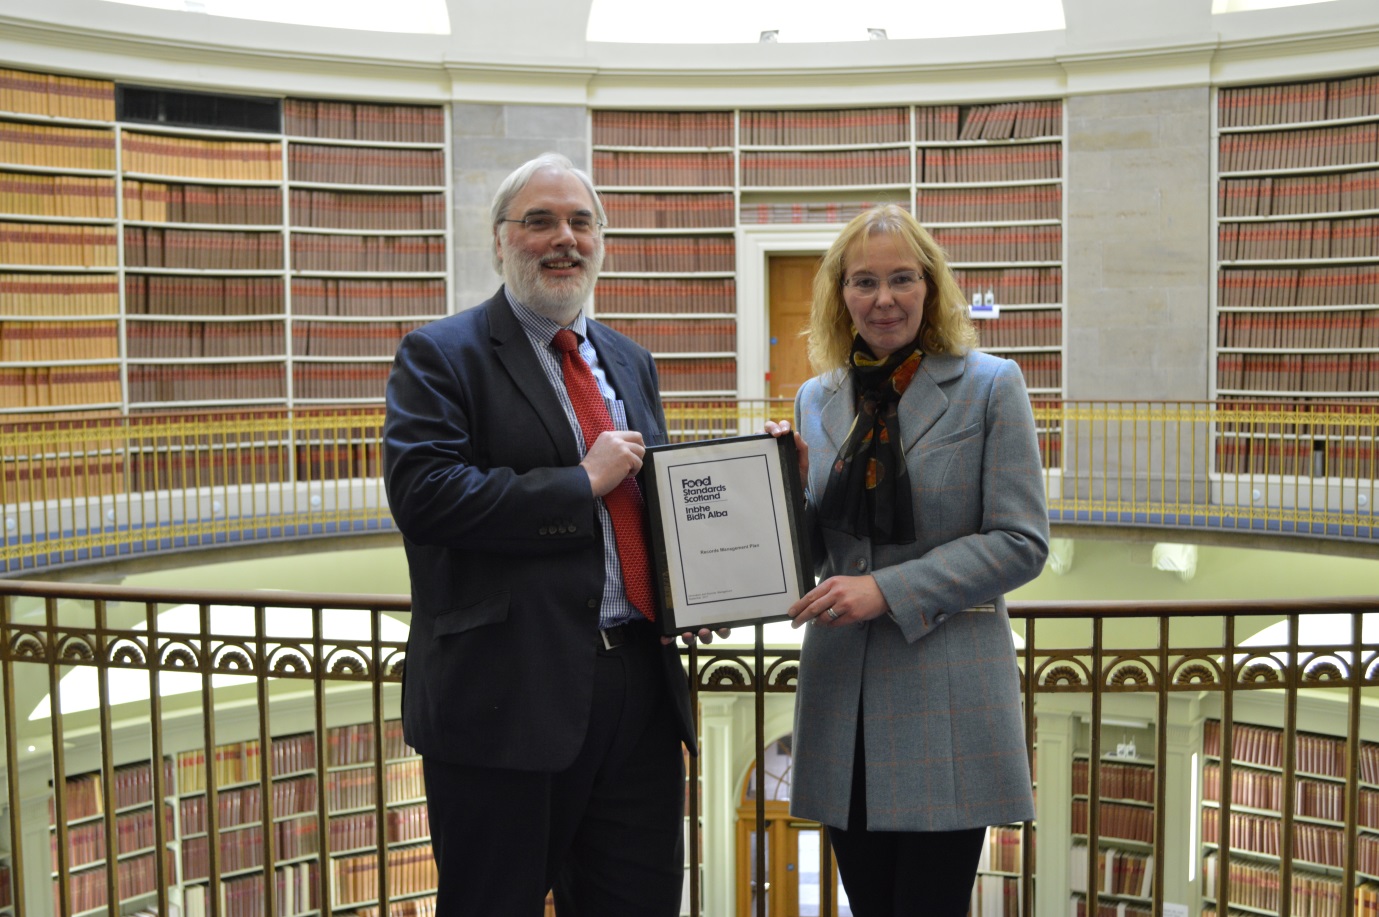 Tim Ellis, Keeper of the Records of Scotland, presenting Elspeth Macdonald, Deputy Chief Executive at Food Standards Scotland, with agreed the Records Management Plan 